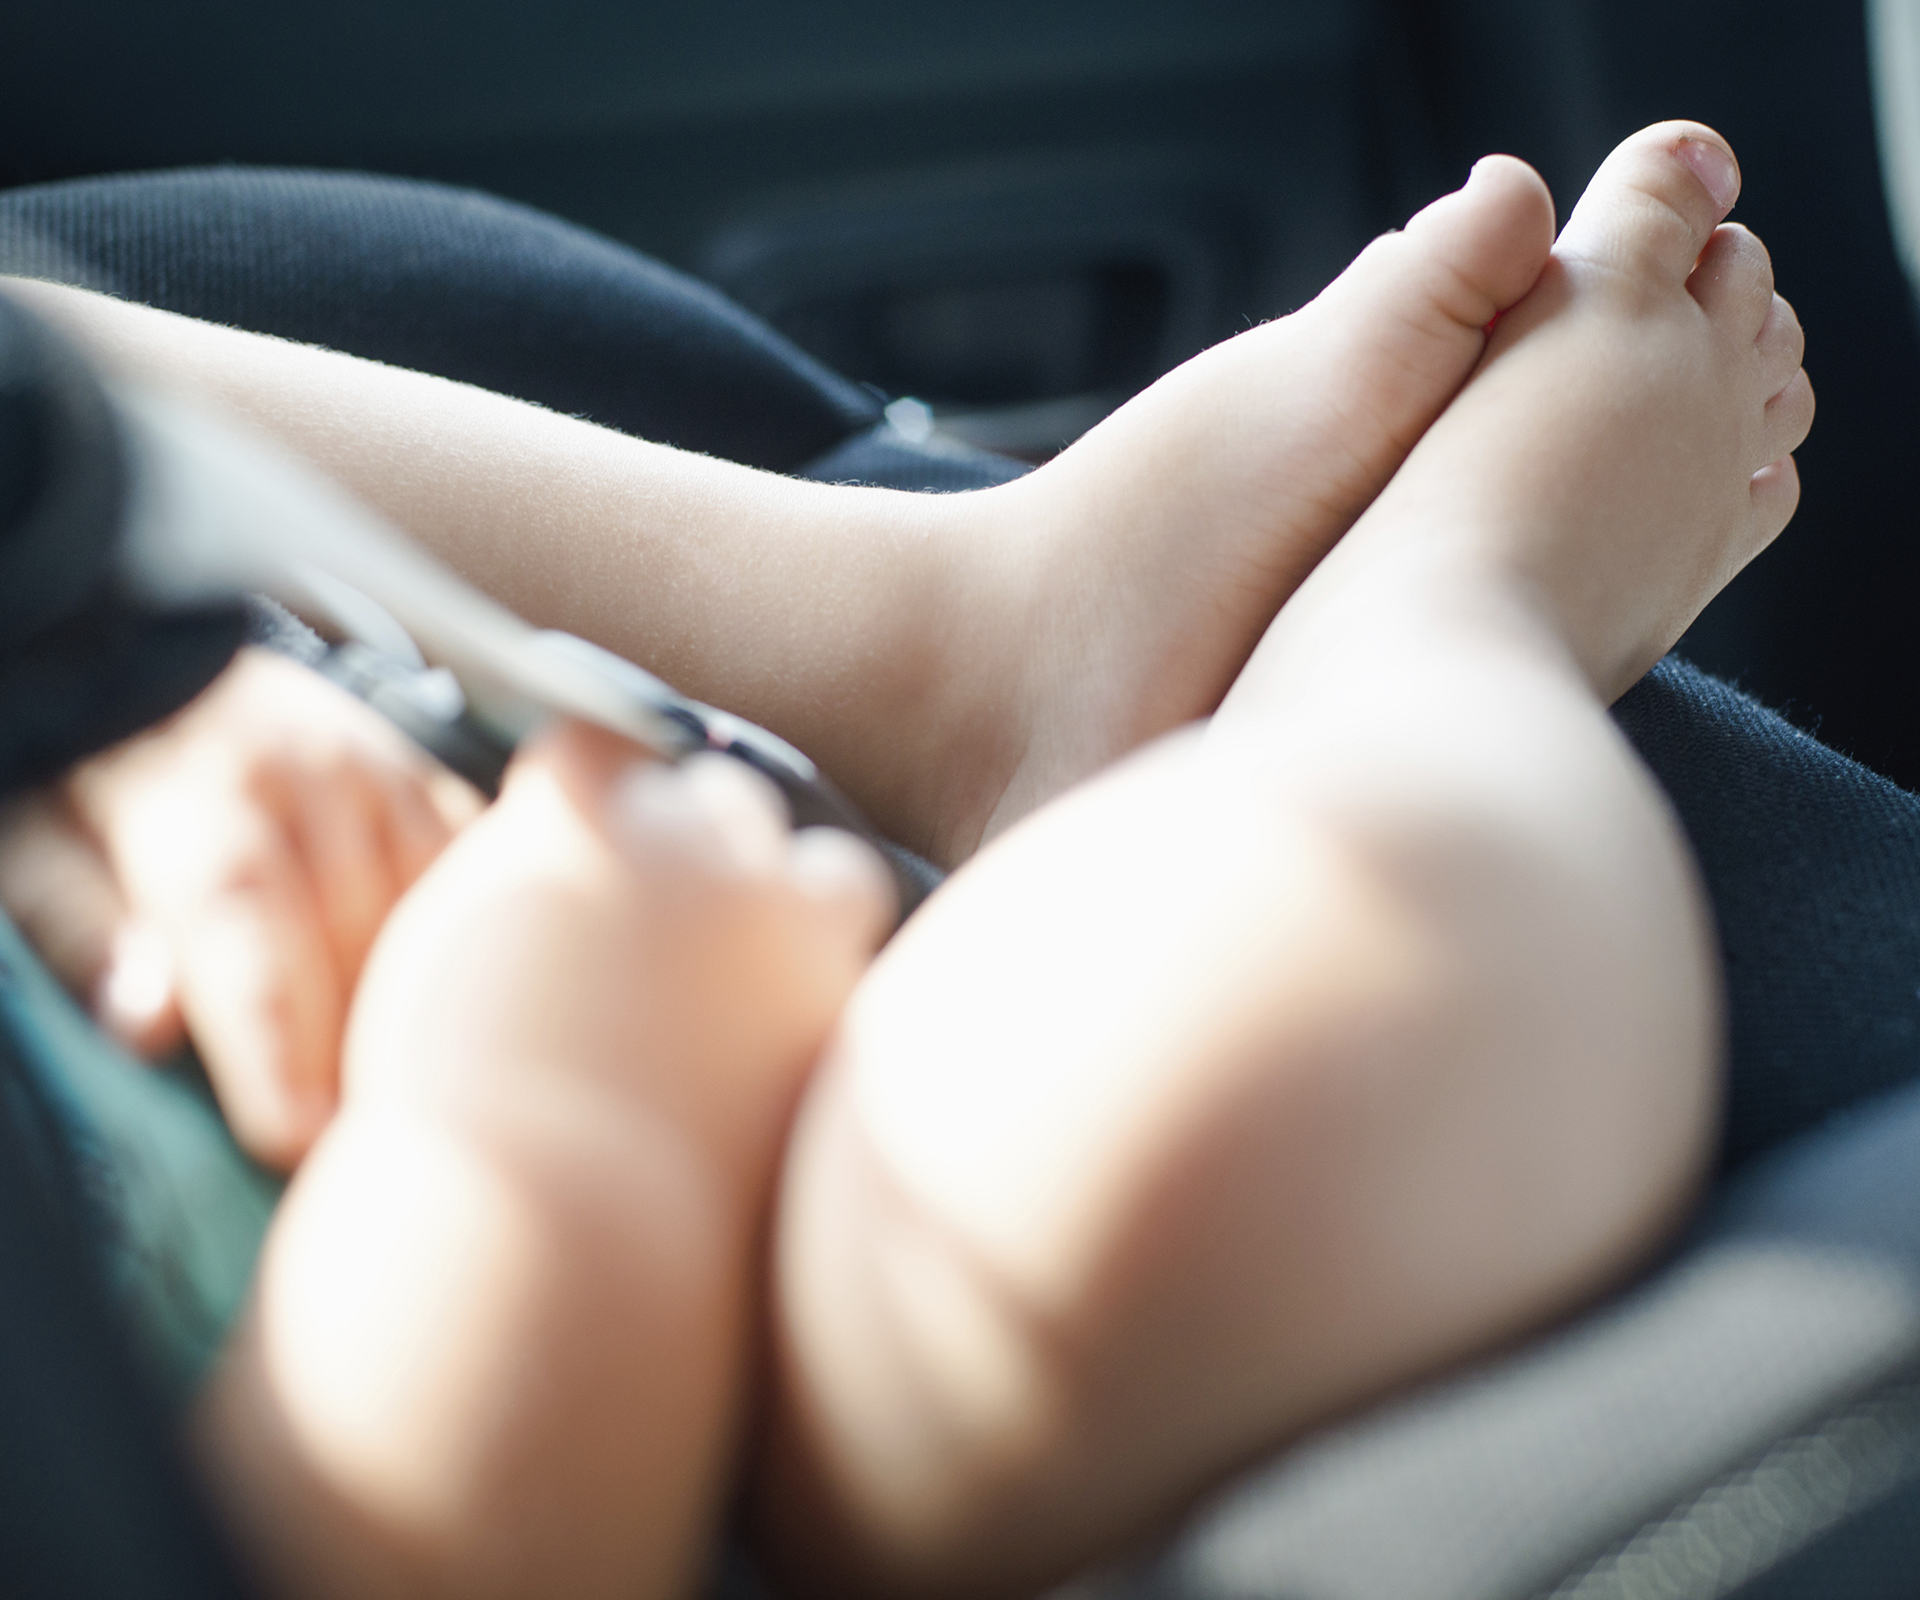 The NRMA reveals which car seats are unsafe for your kids